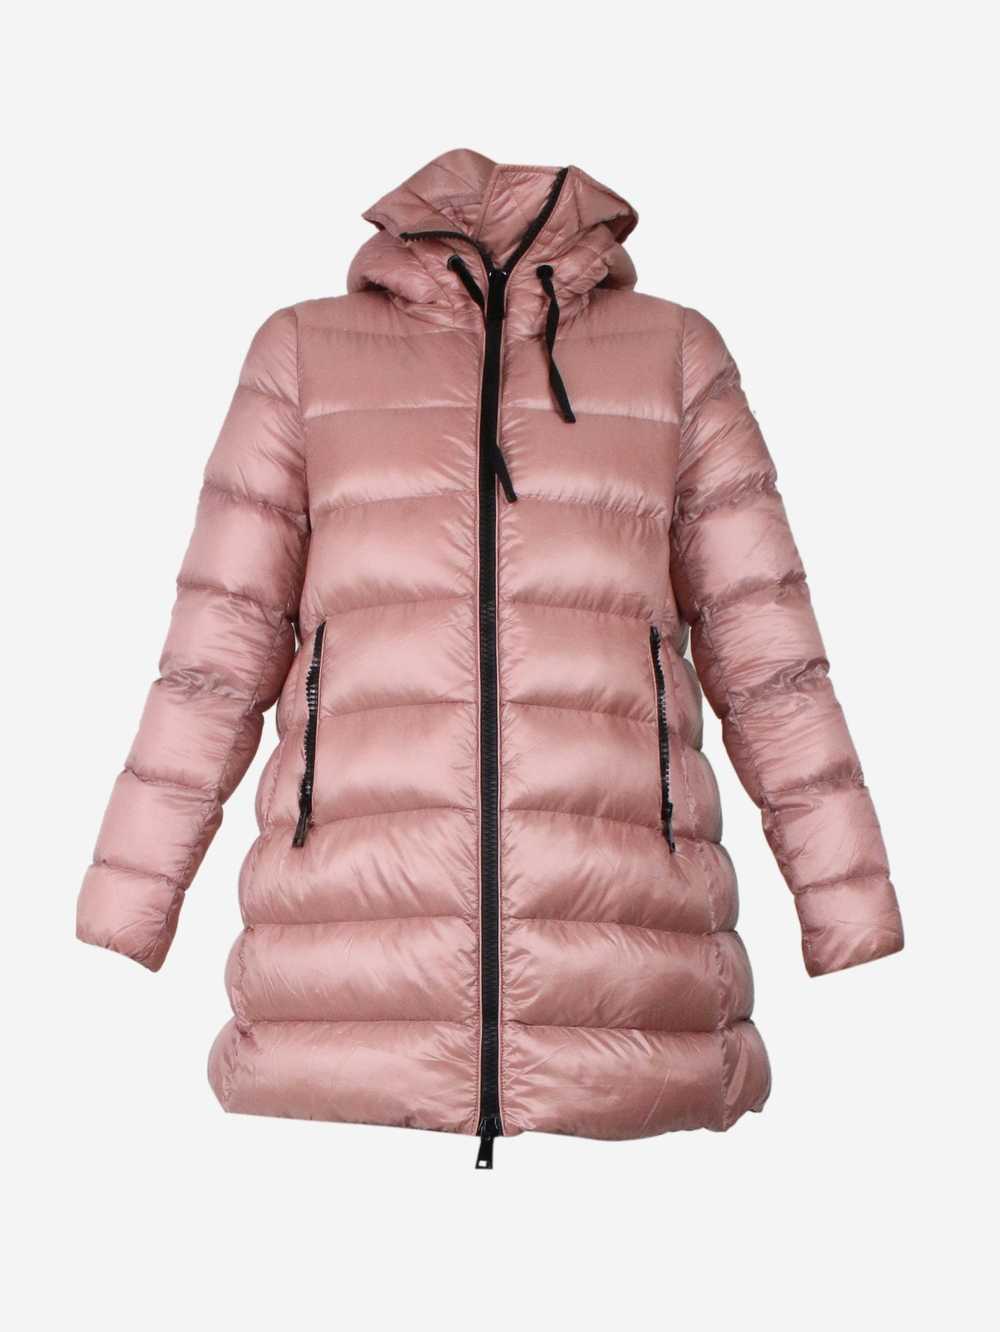 Moncler Pink puffer coat - size 2 - image 3